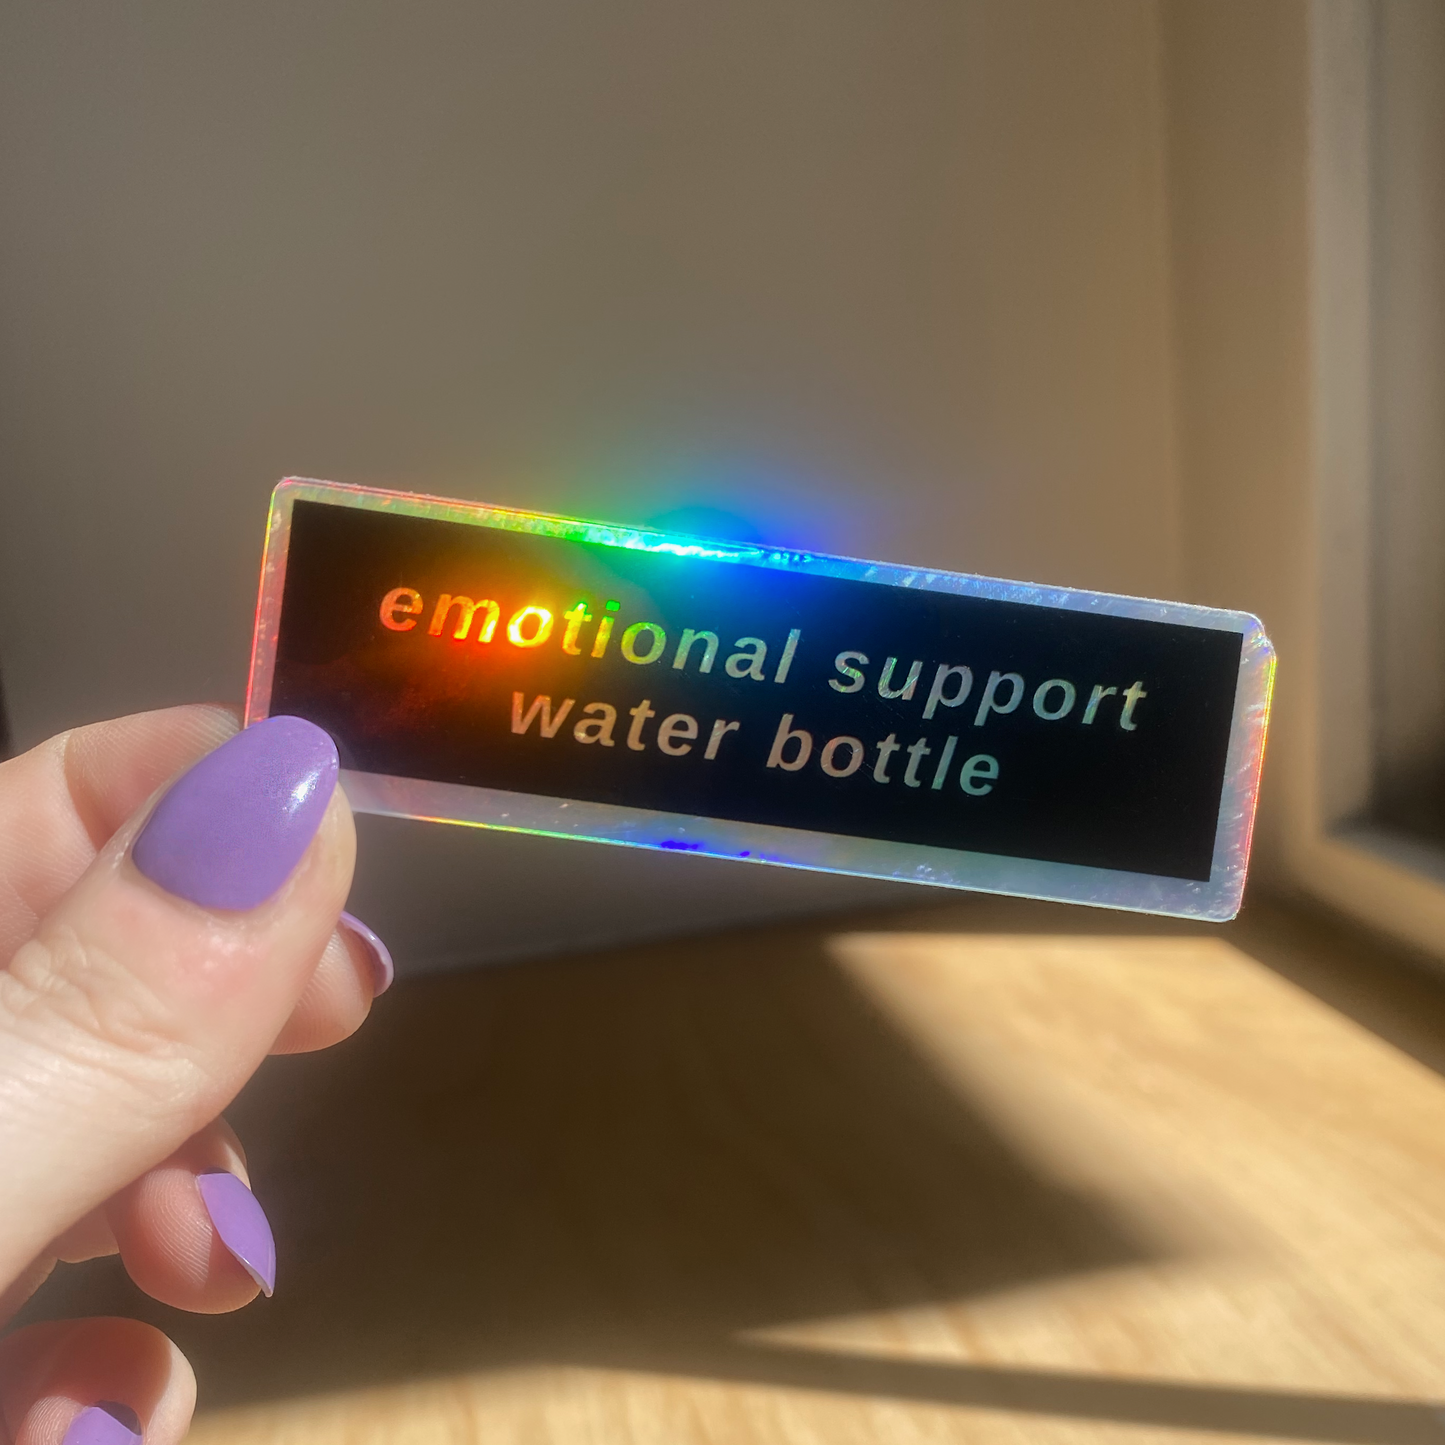 NEW! emotional support water bottle holographic sticker